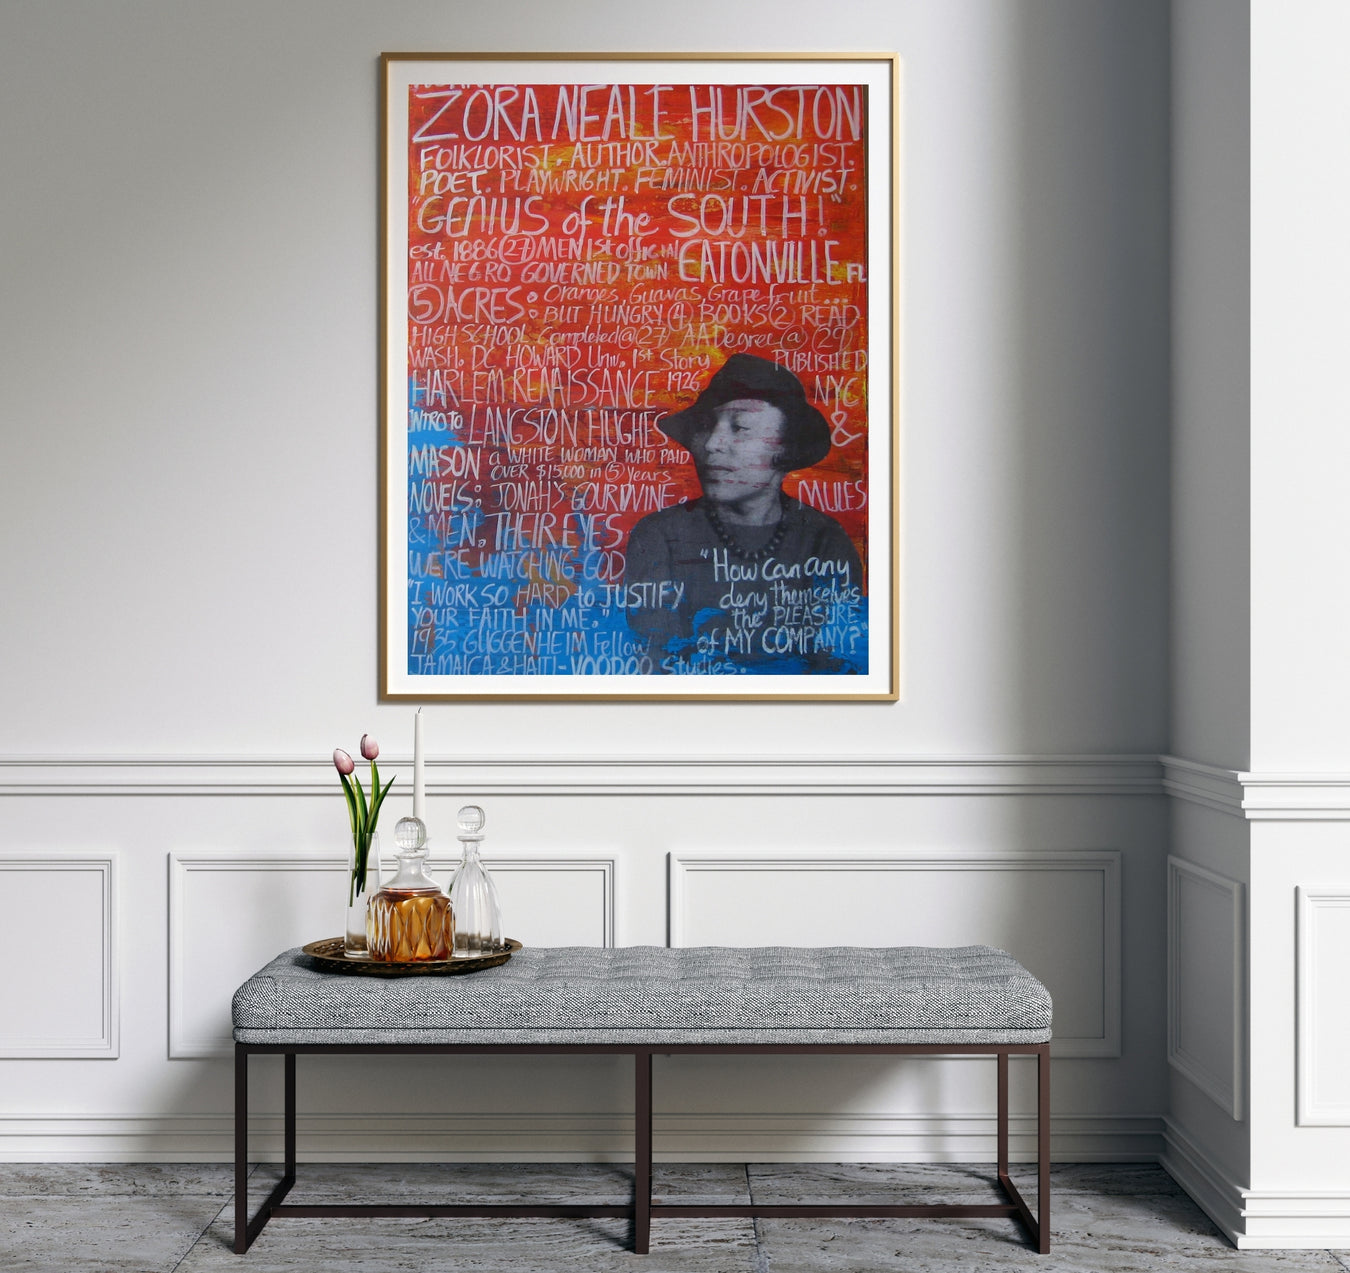 Large mixed media painting in contemporary space. Zora Neale Hurston. Textstraction art by GA Gardner.  Details biography of Zora Neale Hurston. Colorful vibrant painting in home interior.